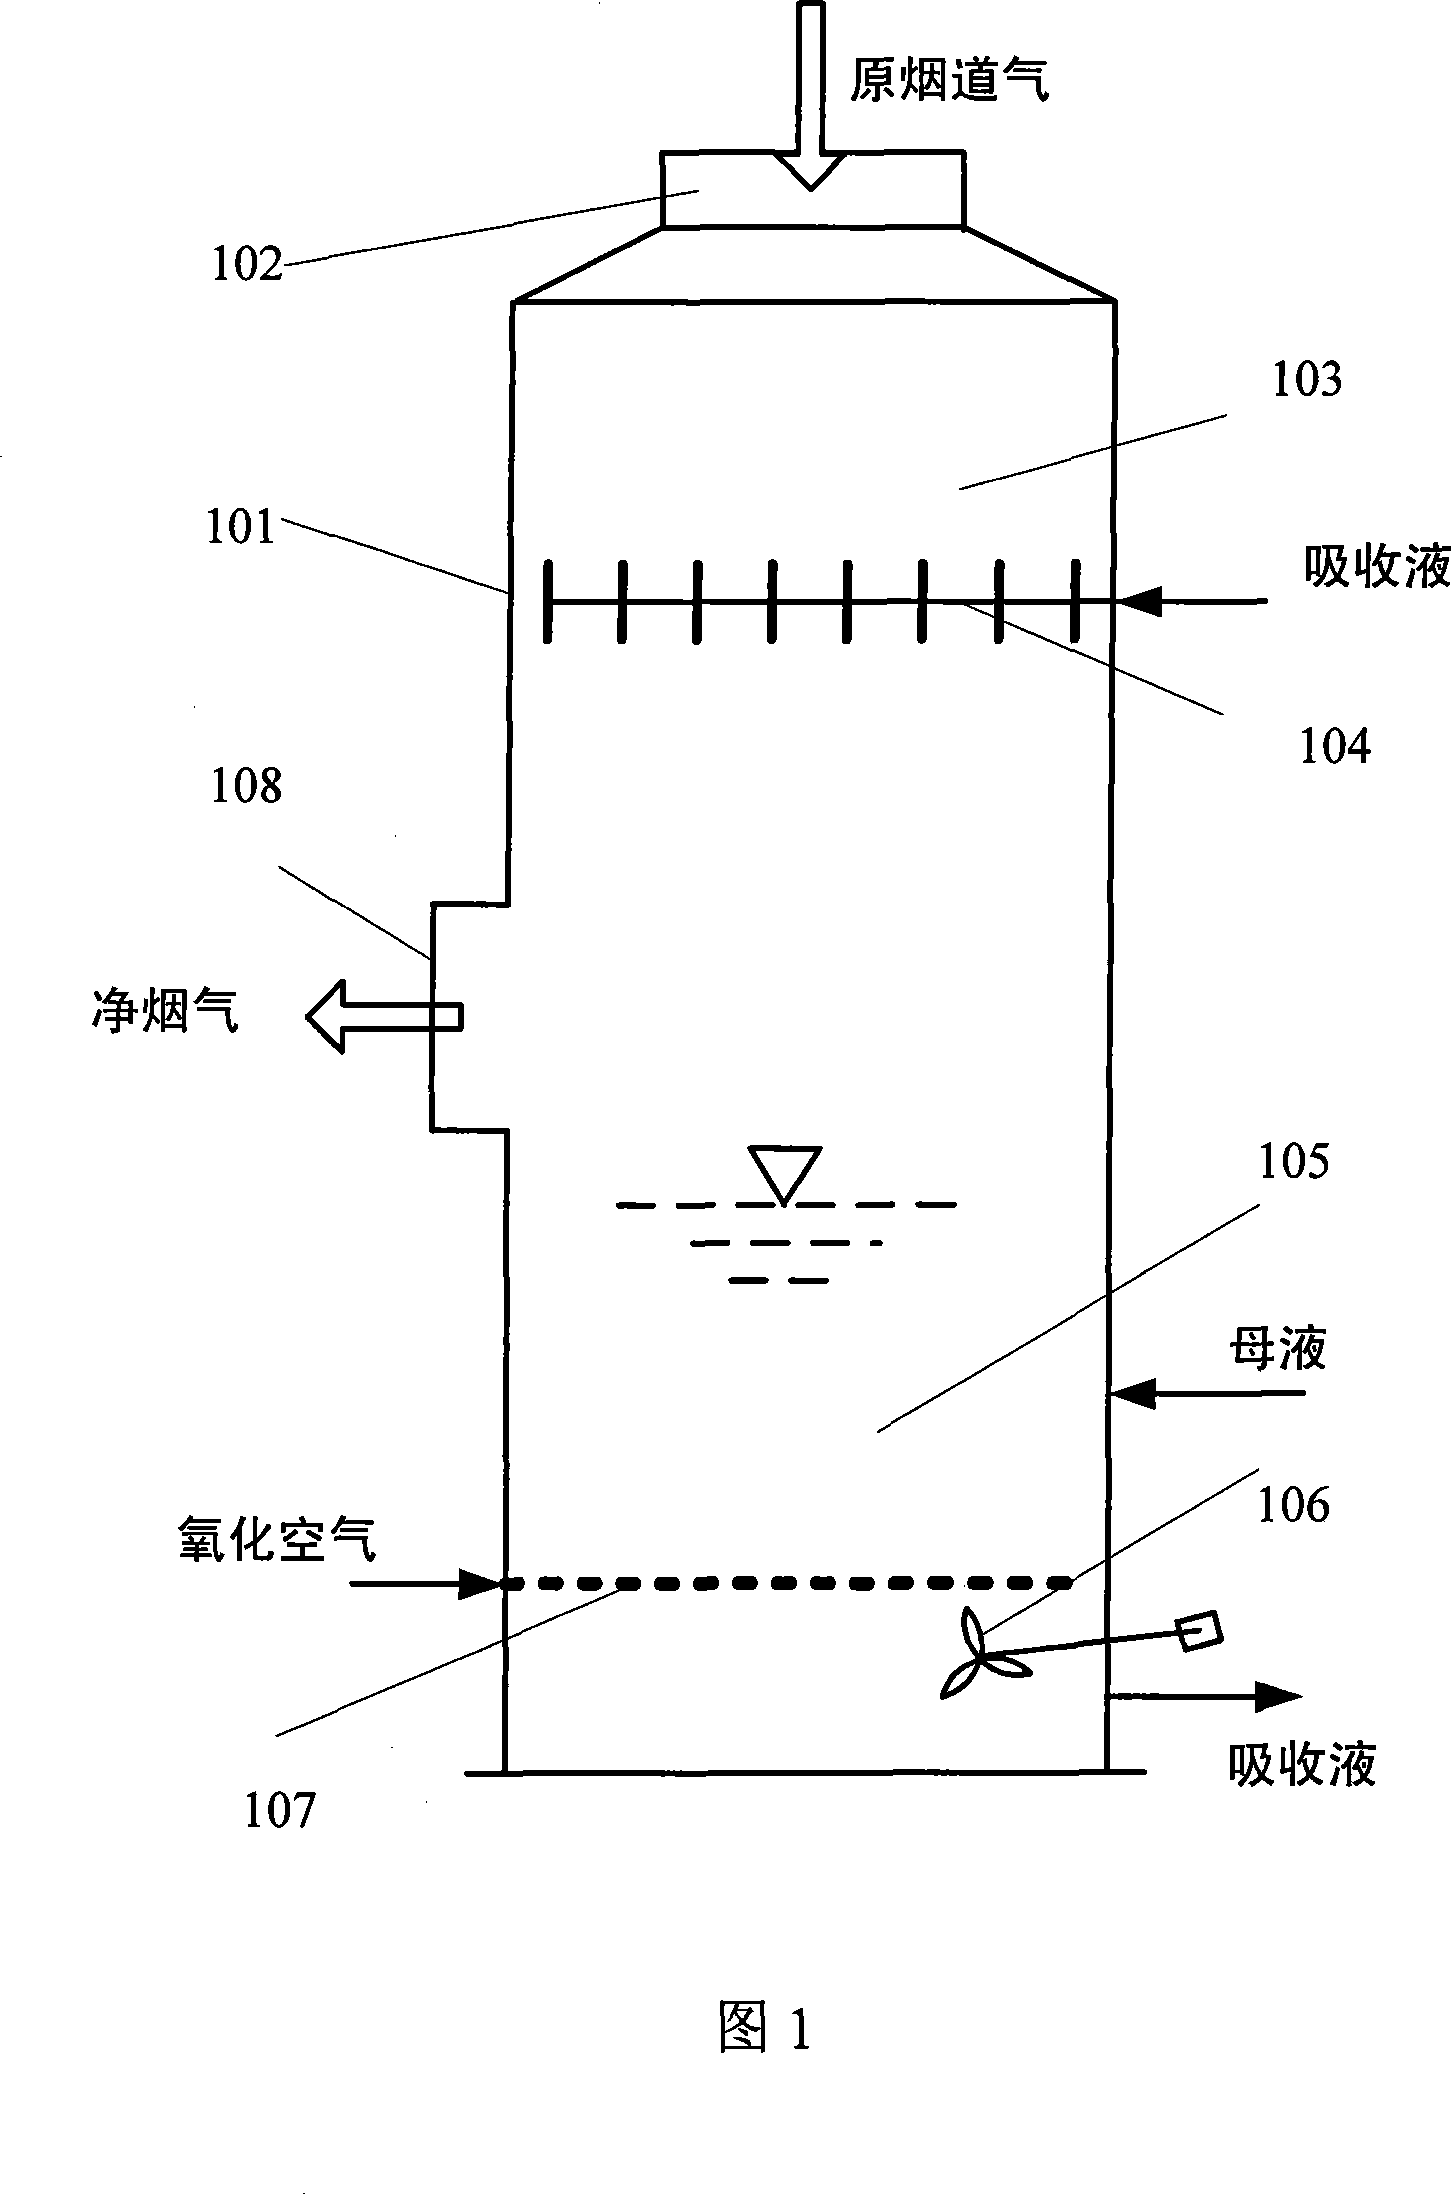 Device and method for purifying flue gas